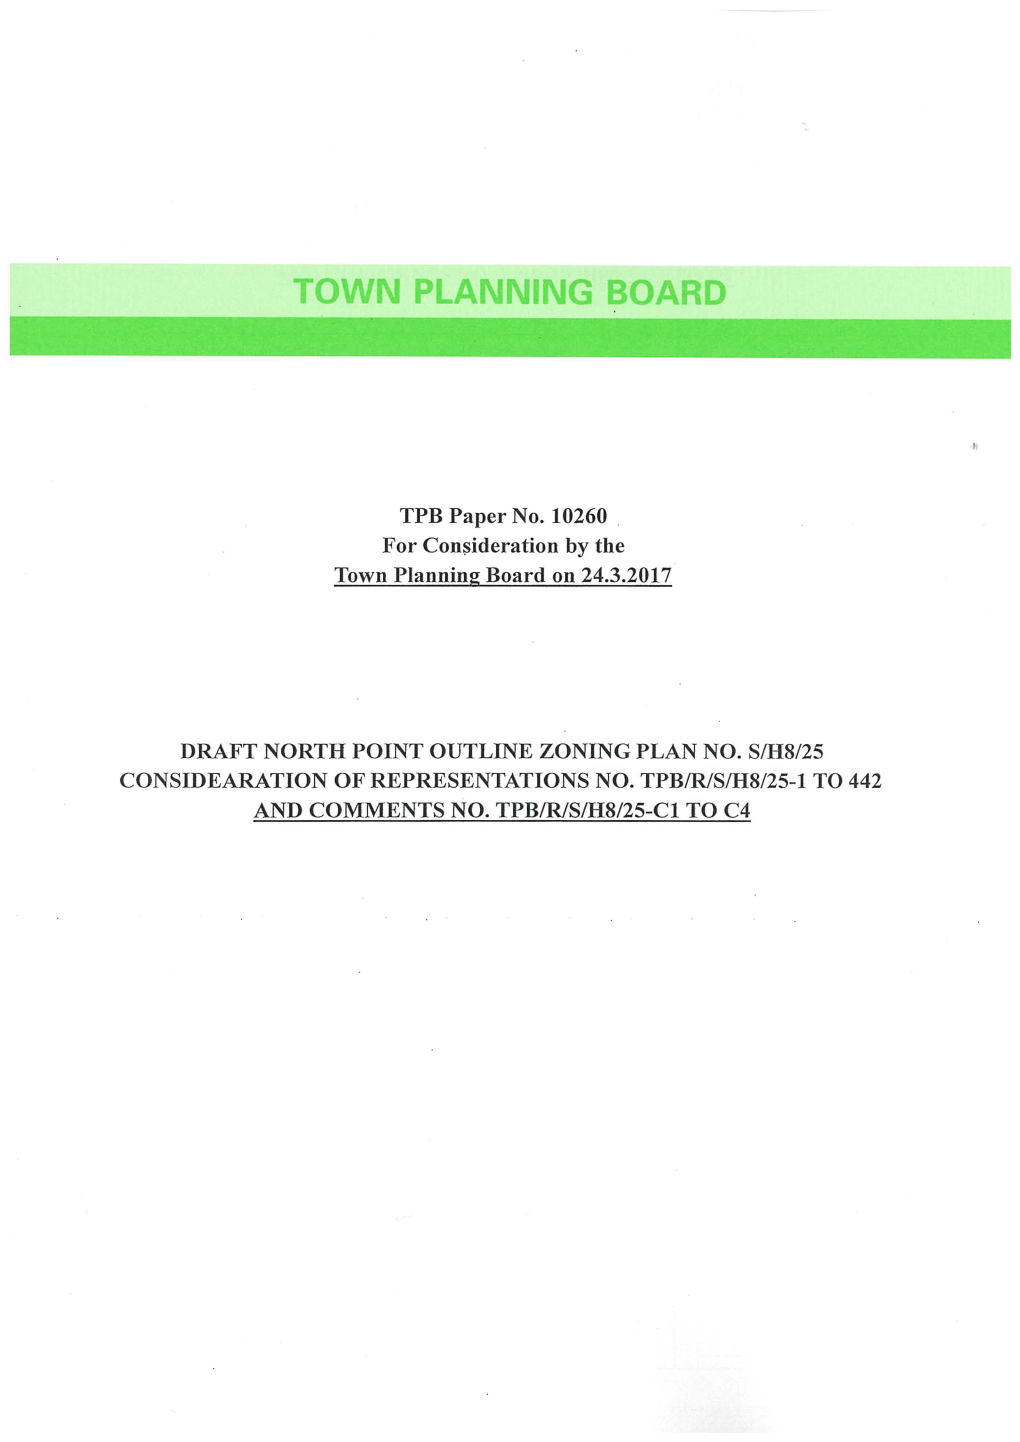 TPB Paper No. 10260 for Consideration by the Town Planning Board on 24.3.2017